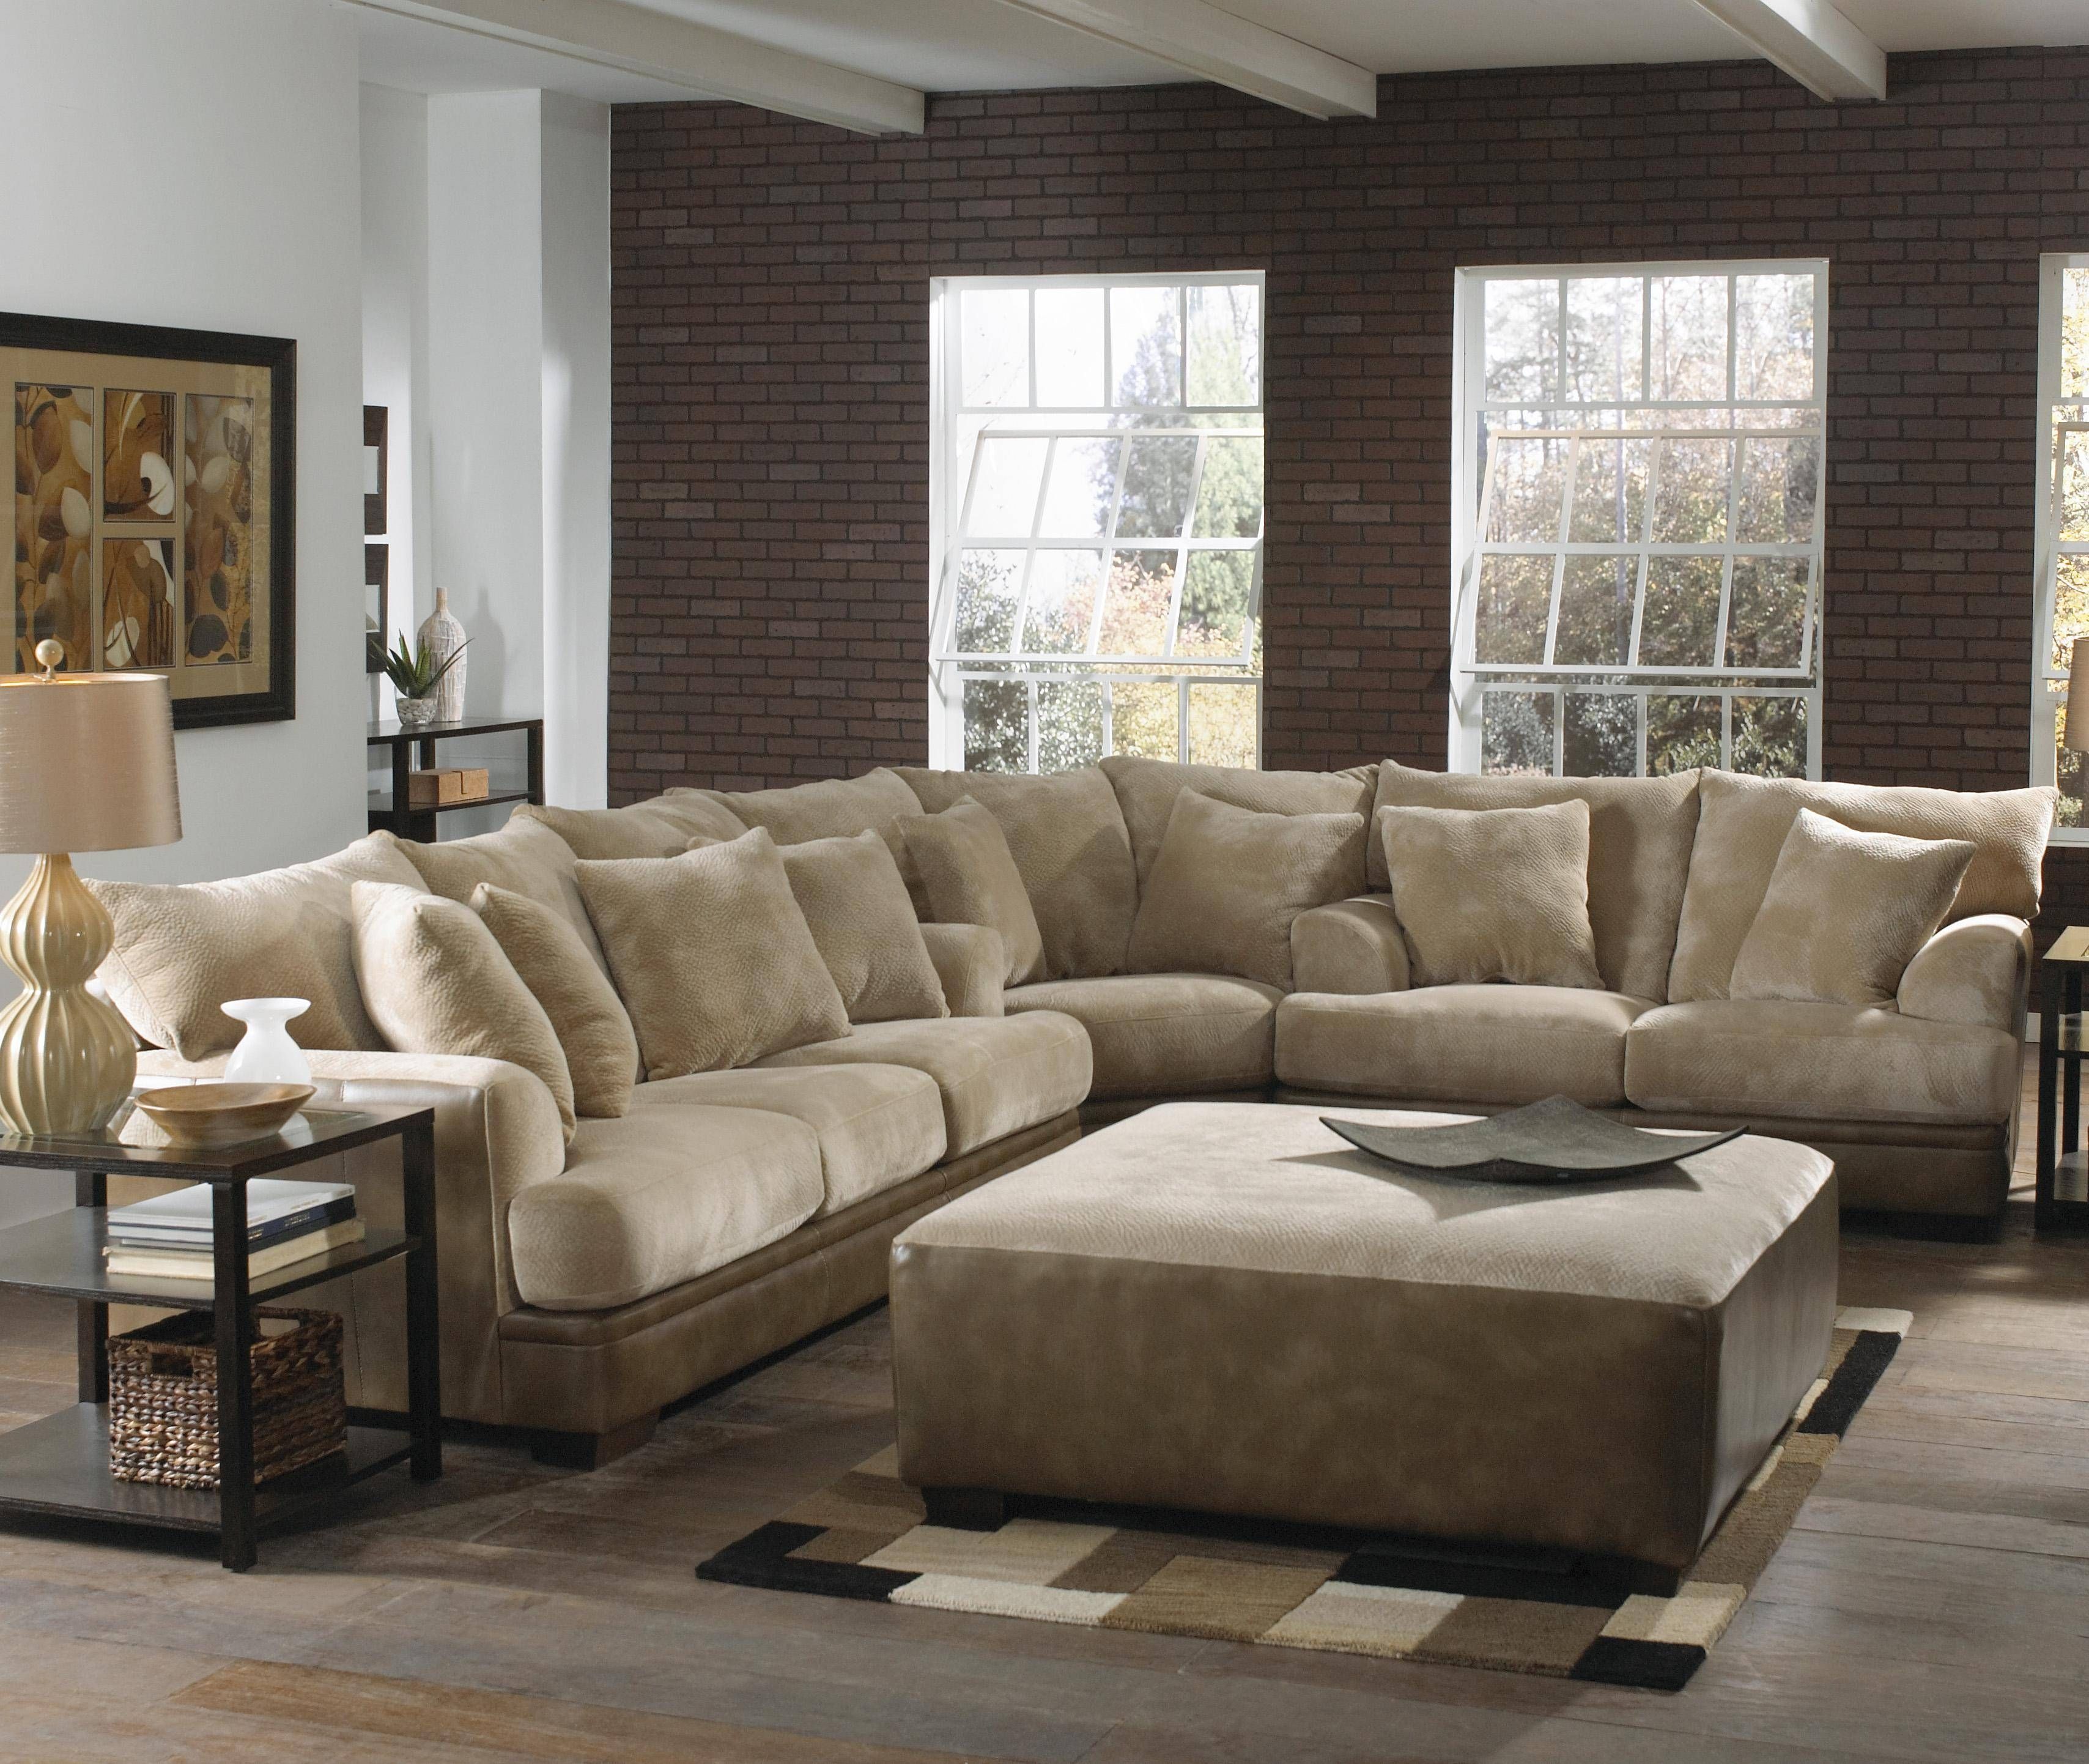 Furniture: Comfortable Deep Seat Sectional For Your Living Room With Regard To Large Comfortable Sectional Sofas (View 9 of 25)